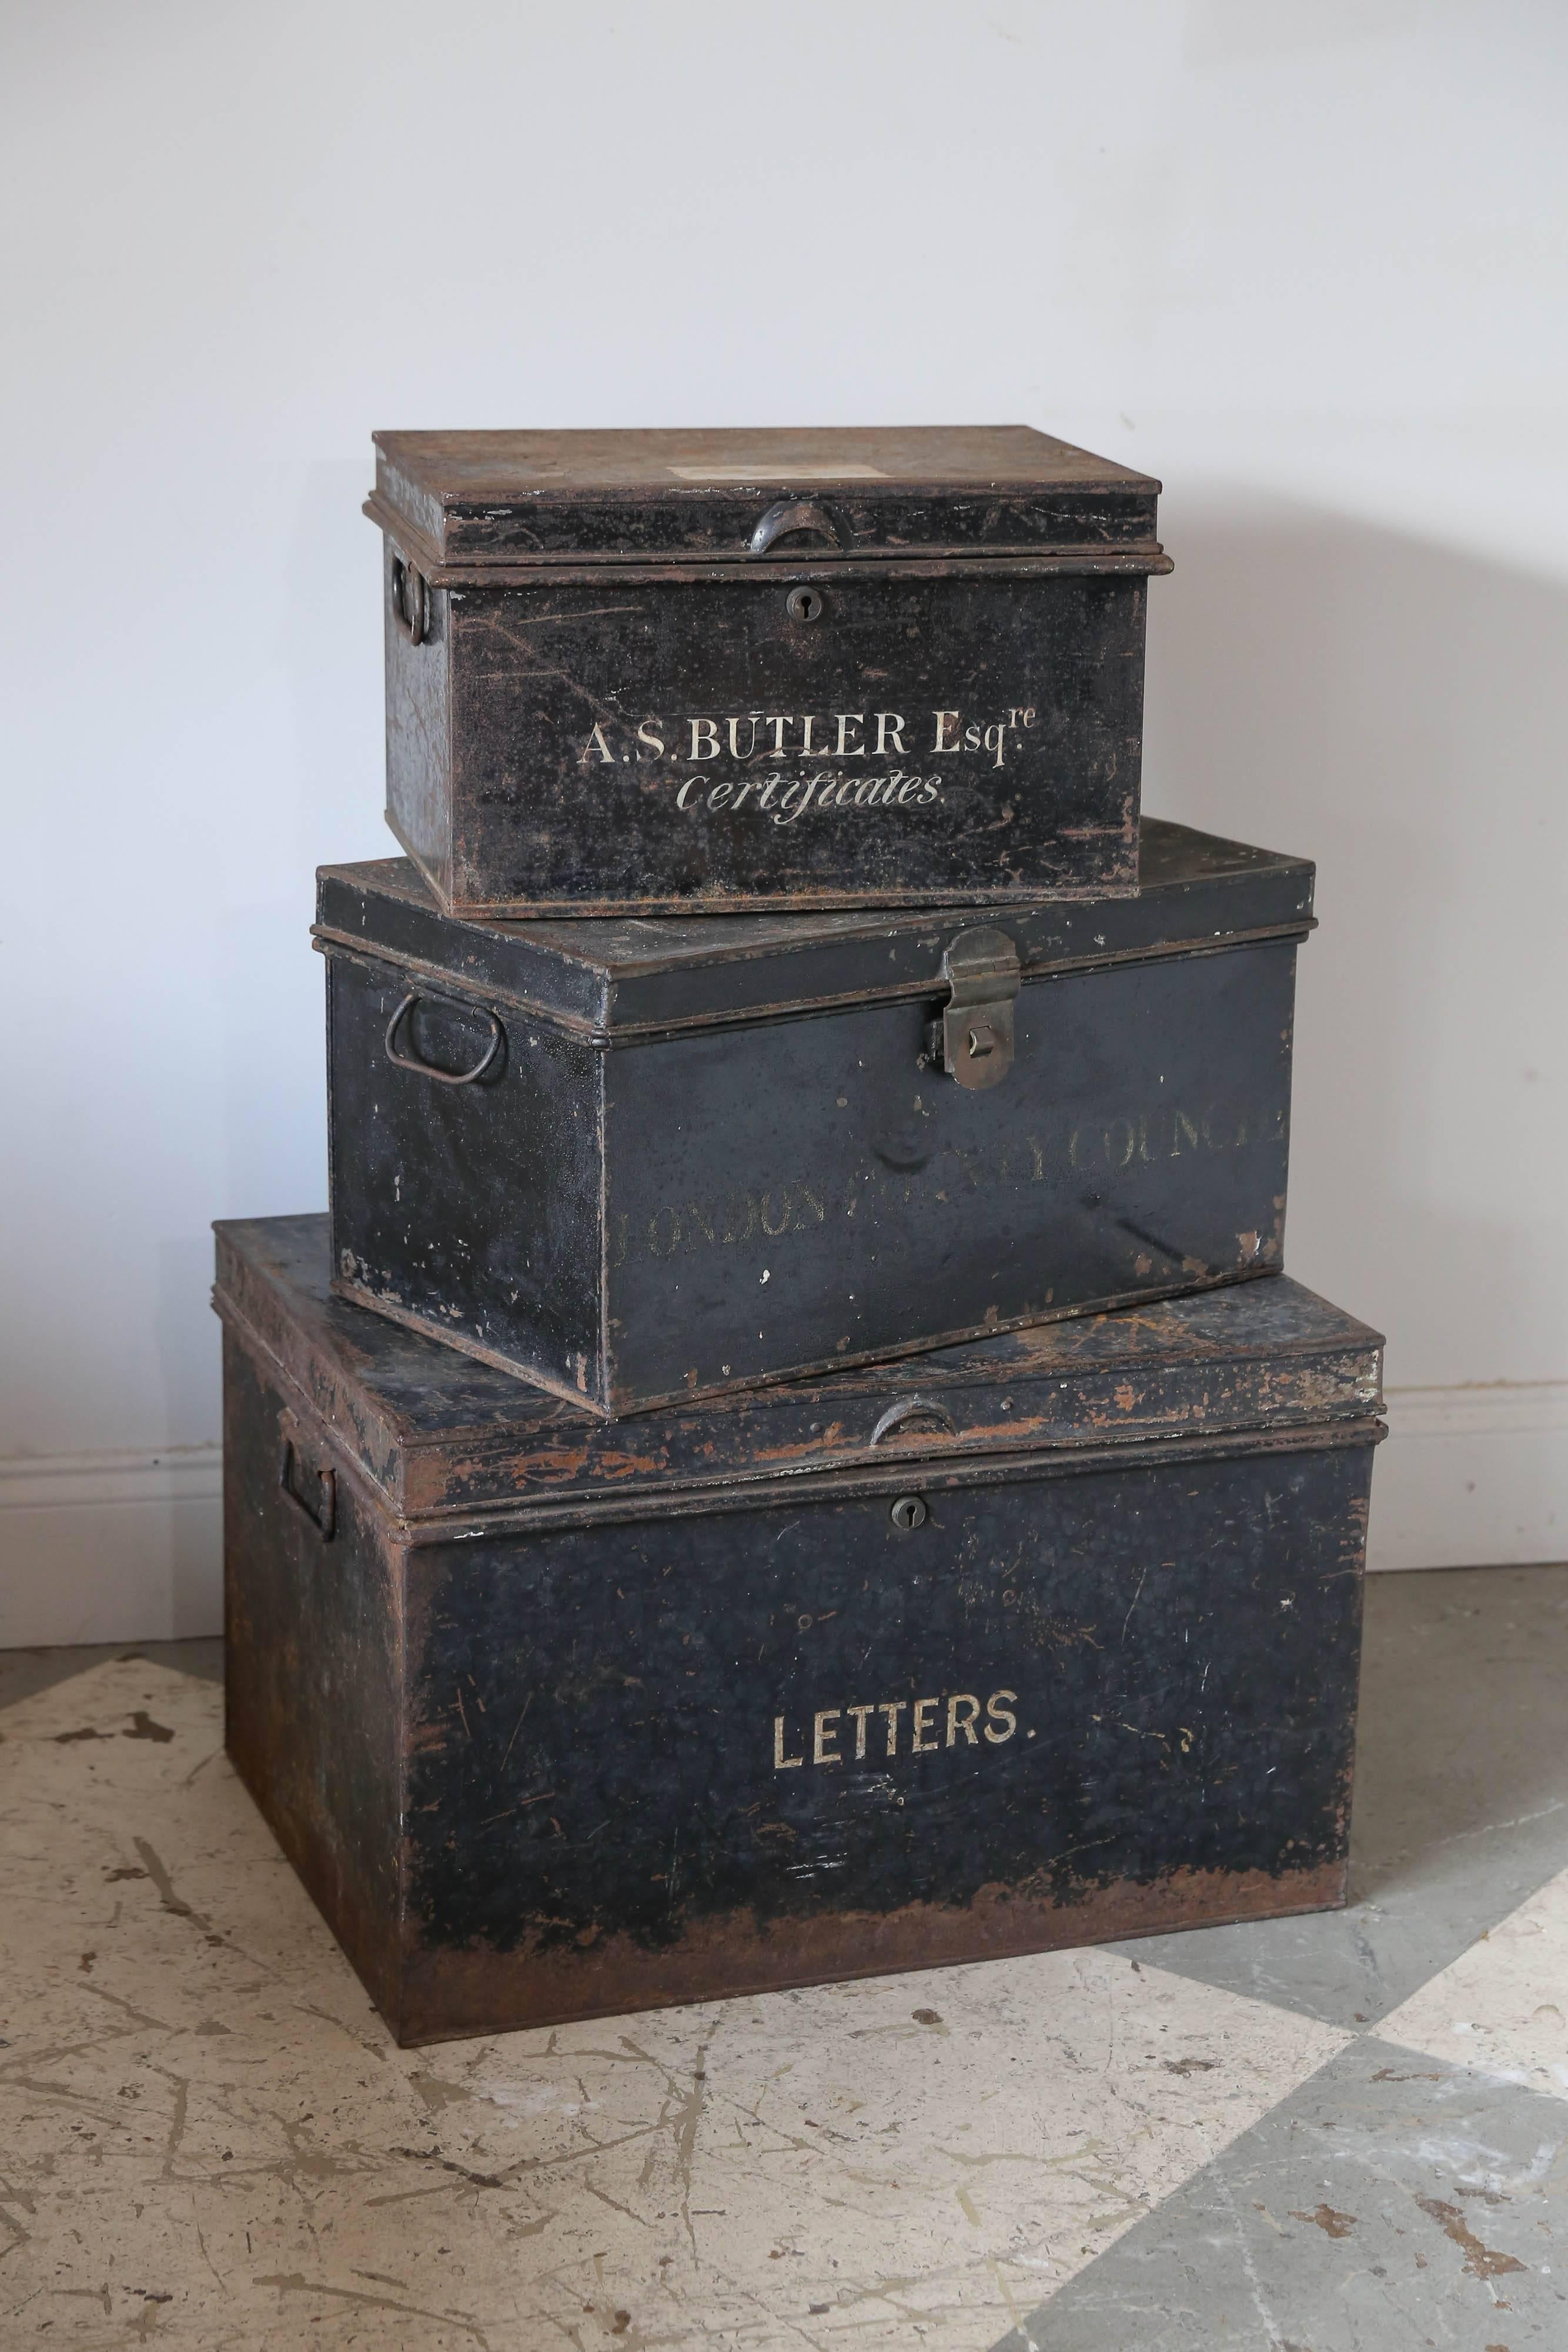 This set of metal document boxes was sourced in France and each features original lettering on the outside and painted interiors. The mid-sized box is sectioned into two spaces inside, while the smallest and largest of the set are not. The smallest